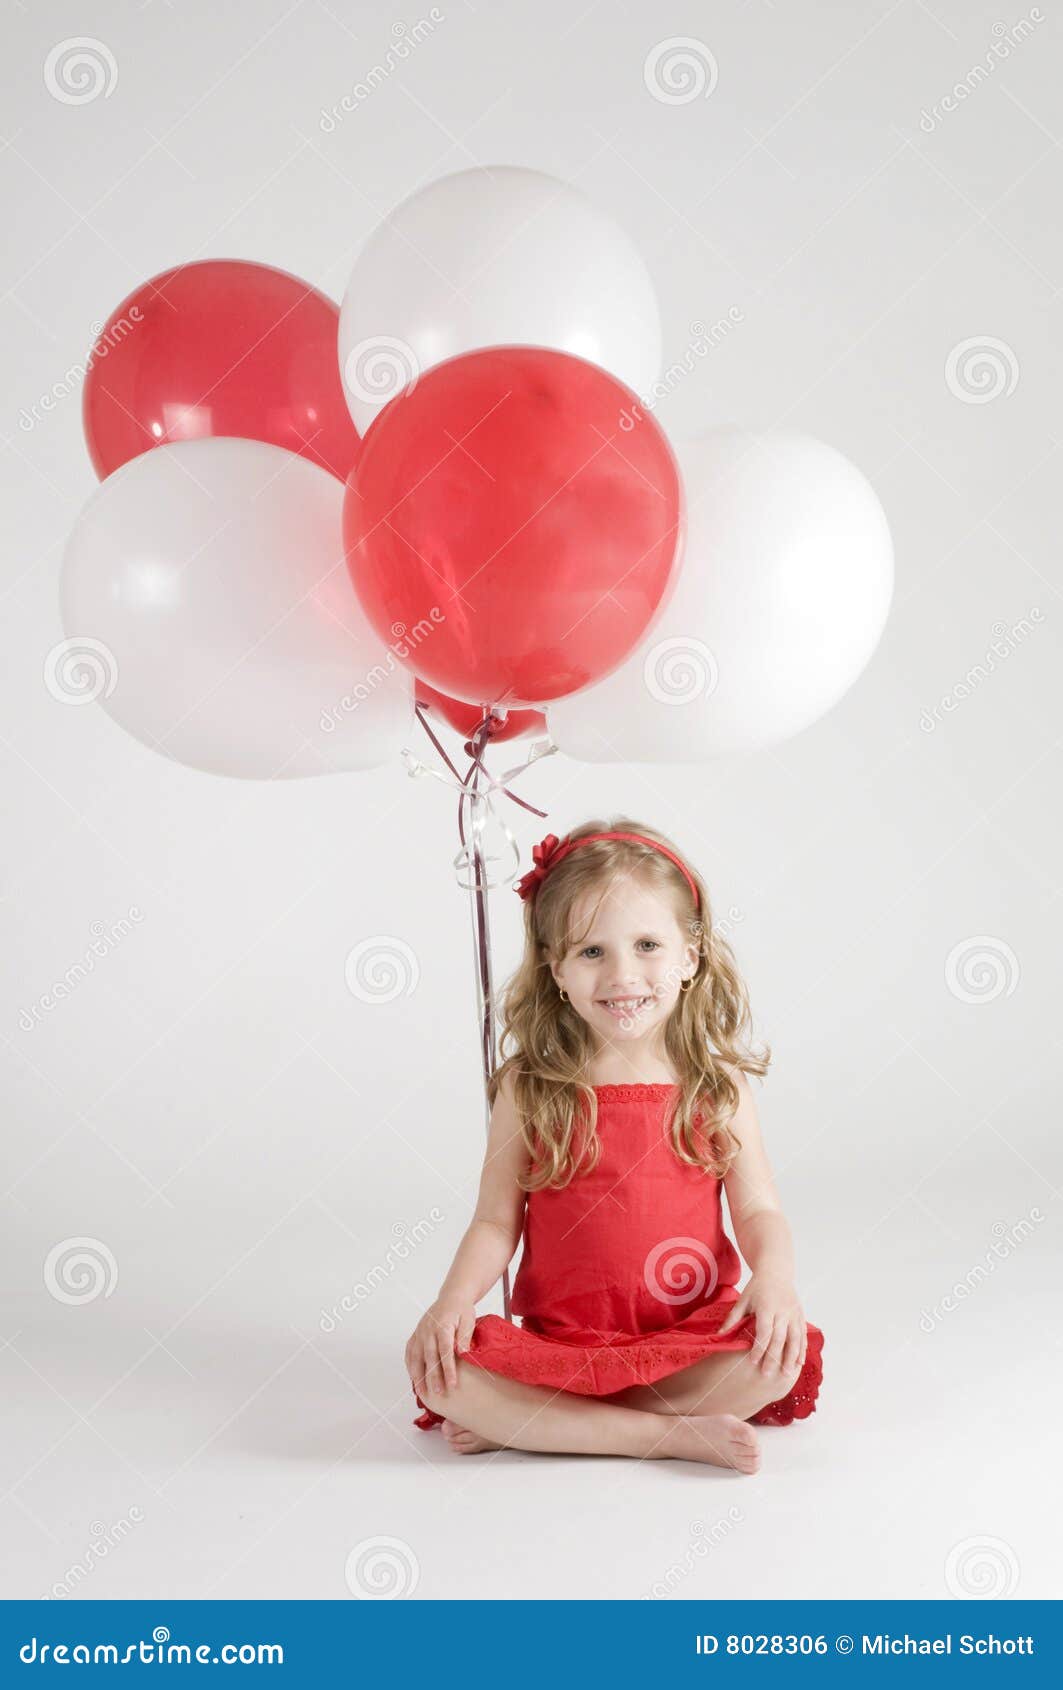 girl with red and white balloons